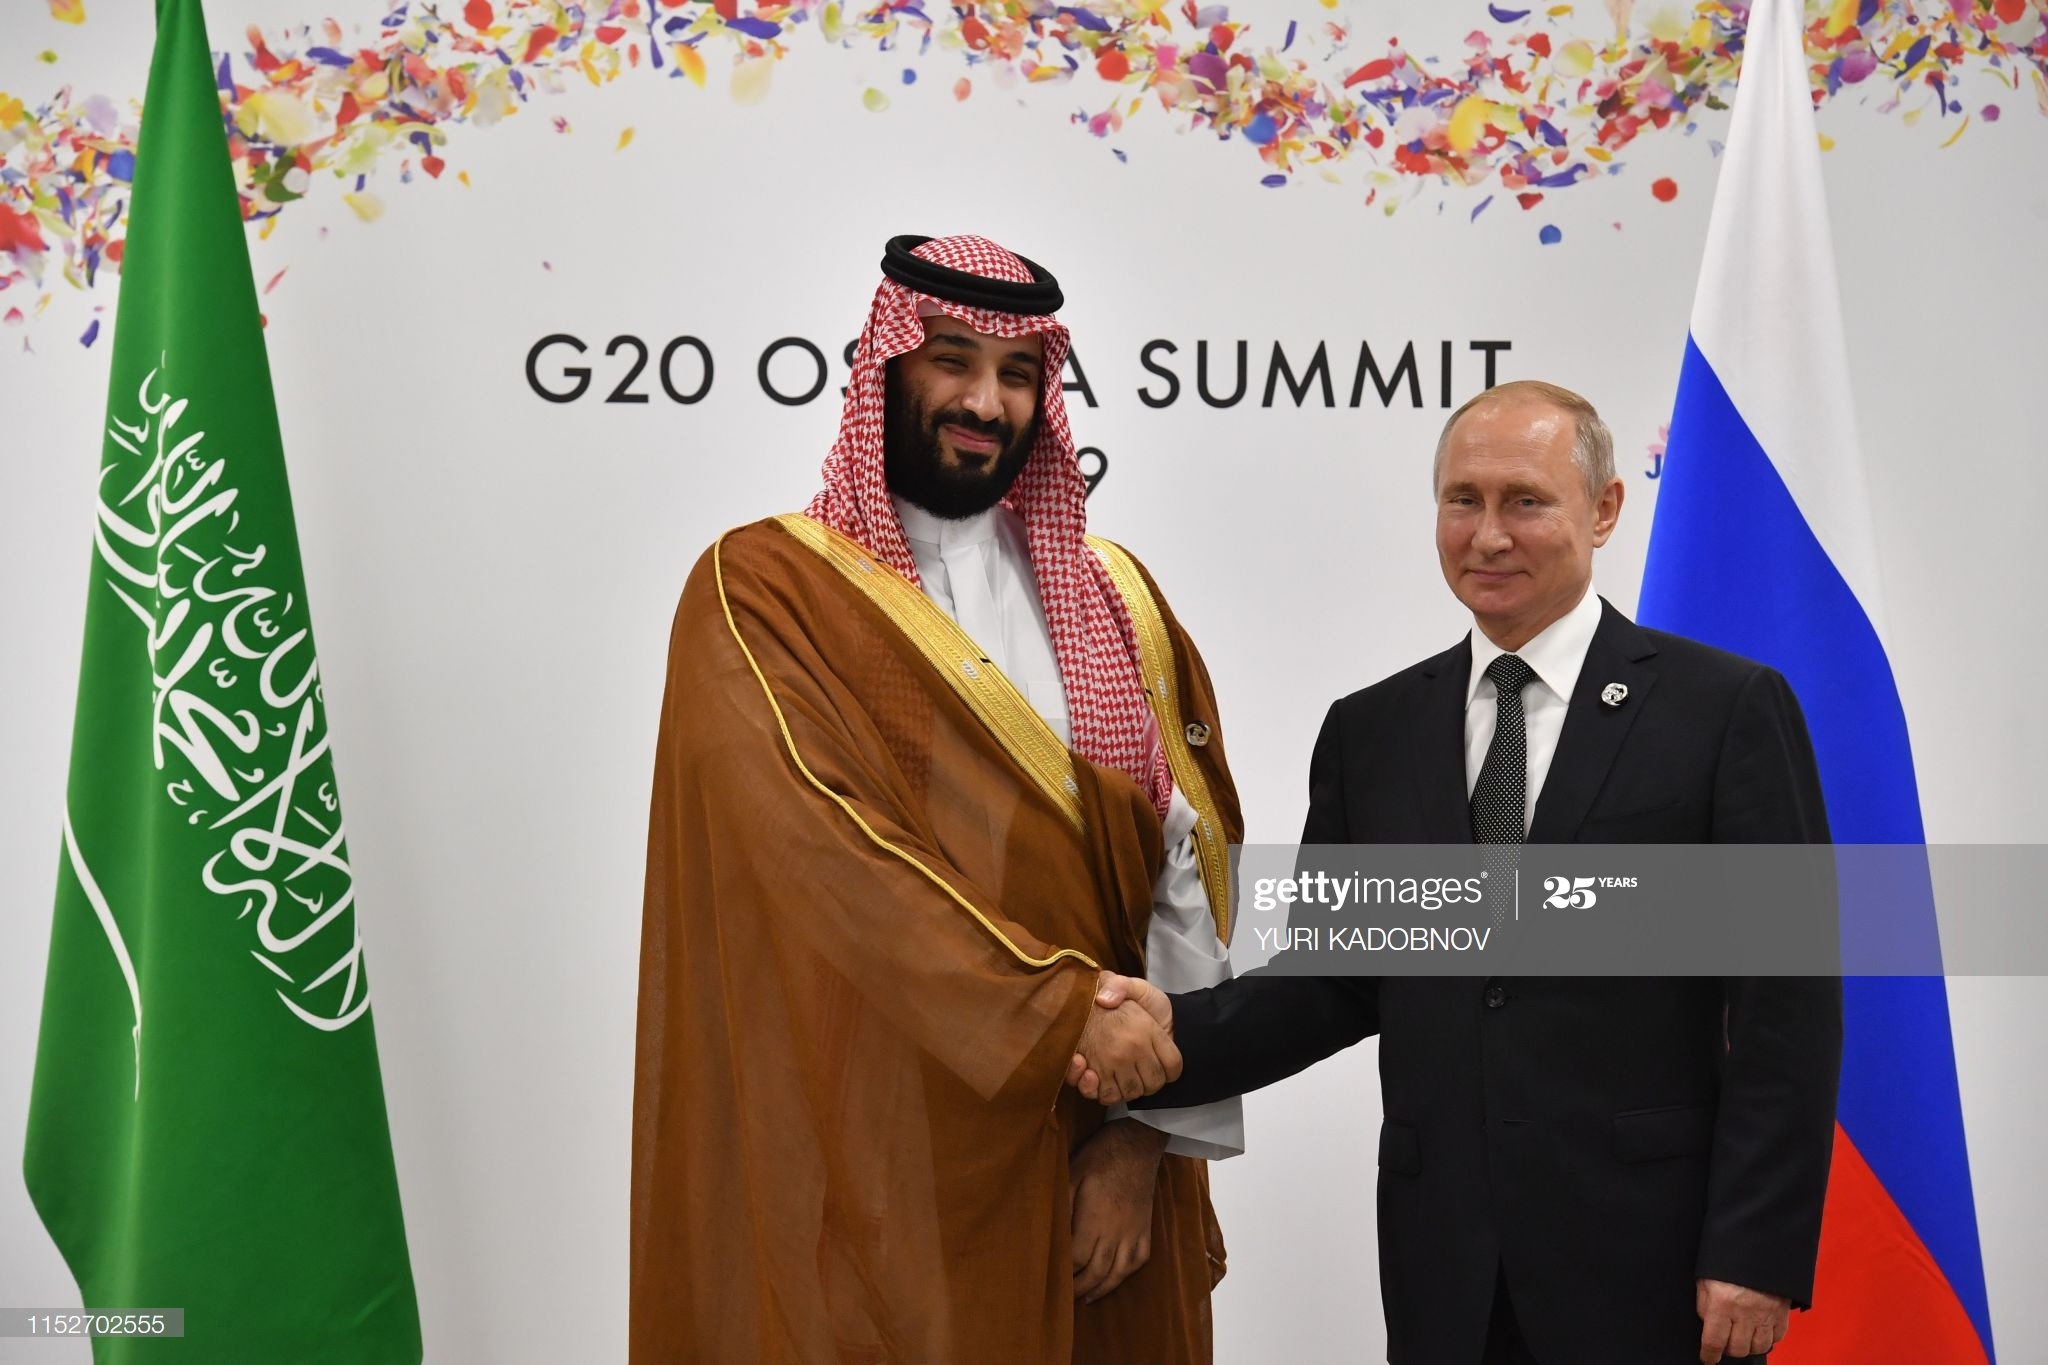 Russia's President Vladimir Putin (R) shakes hands with Saudi Arabia's Crown Prince Mohammed bin Salman during a meeting on the sidelines of the G20 Summit in Osaka on June 29, 2019. (Photo by Yuri KADOBNOV / POOL / AFP) (Photo credit should read YURI KADOBNOV/AFP via Getty Images)